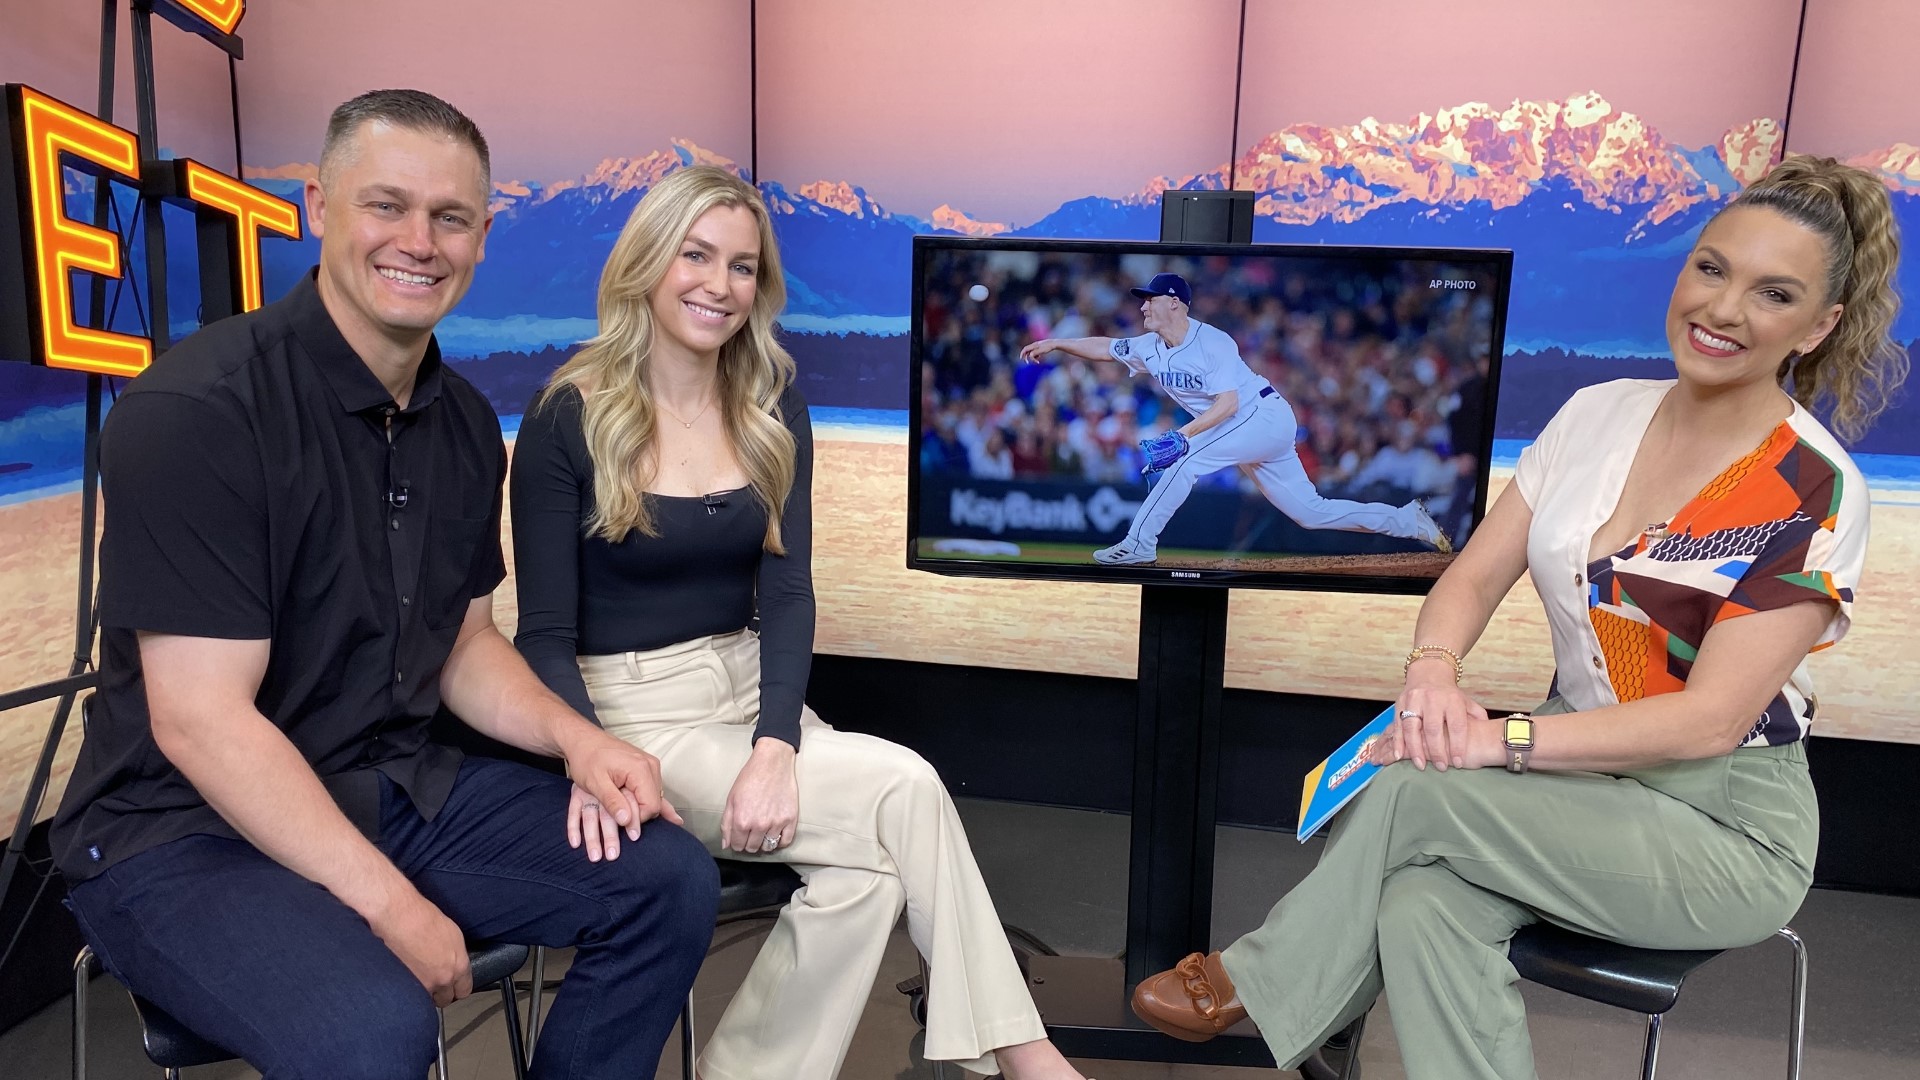 Paul Sewald throws heat as a closing pitcher for the Mariners. Off the field, he and his wife Molly are throwing their support behind an important cause.